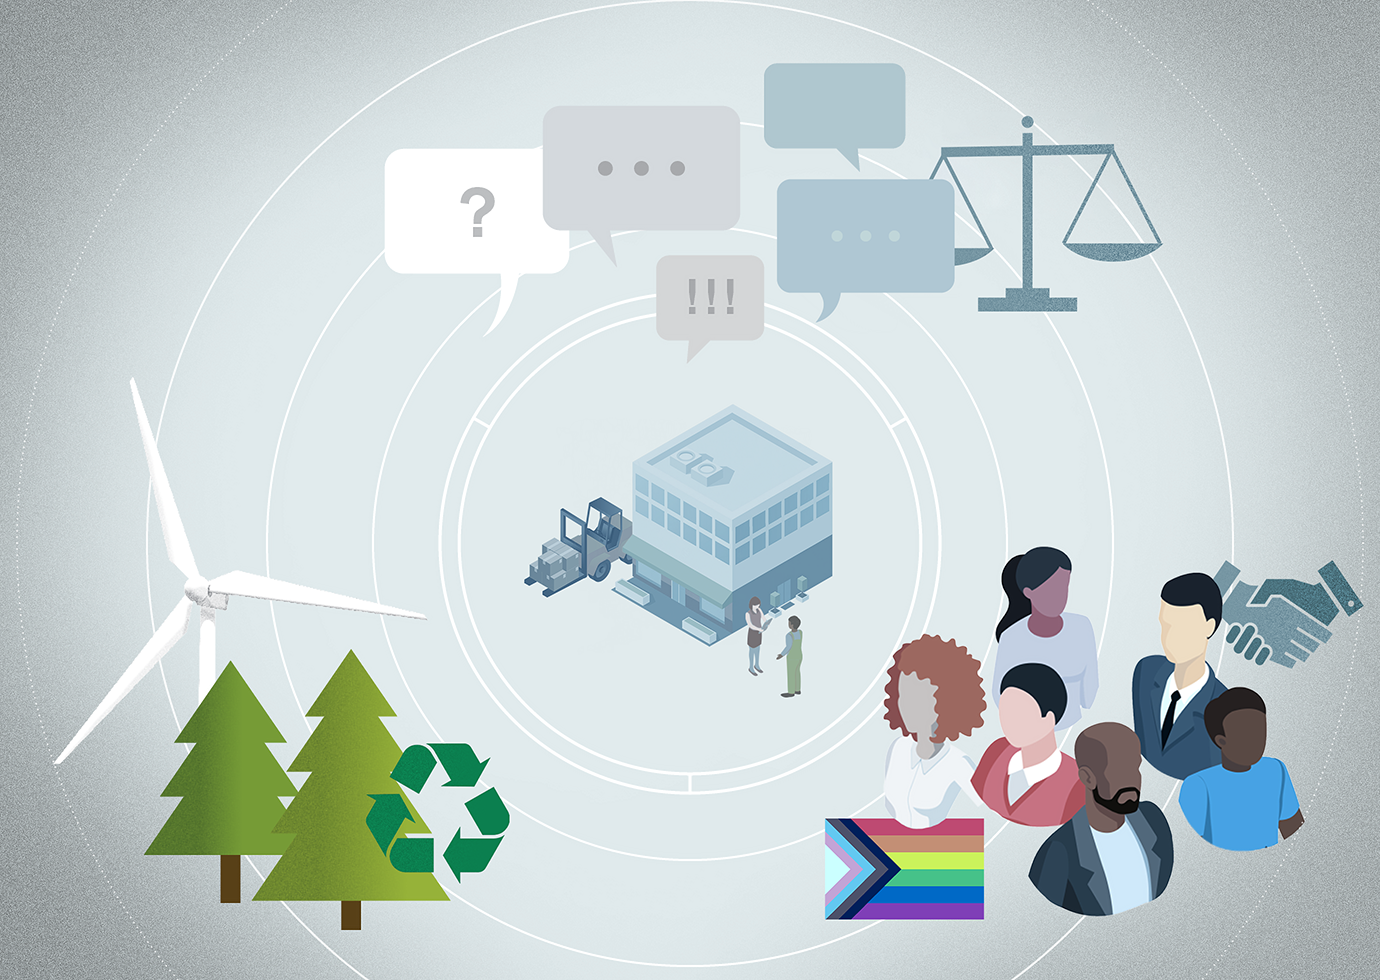 An illustration of elements representing environmental, social, and governance ideas around a small office building